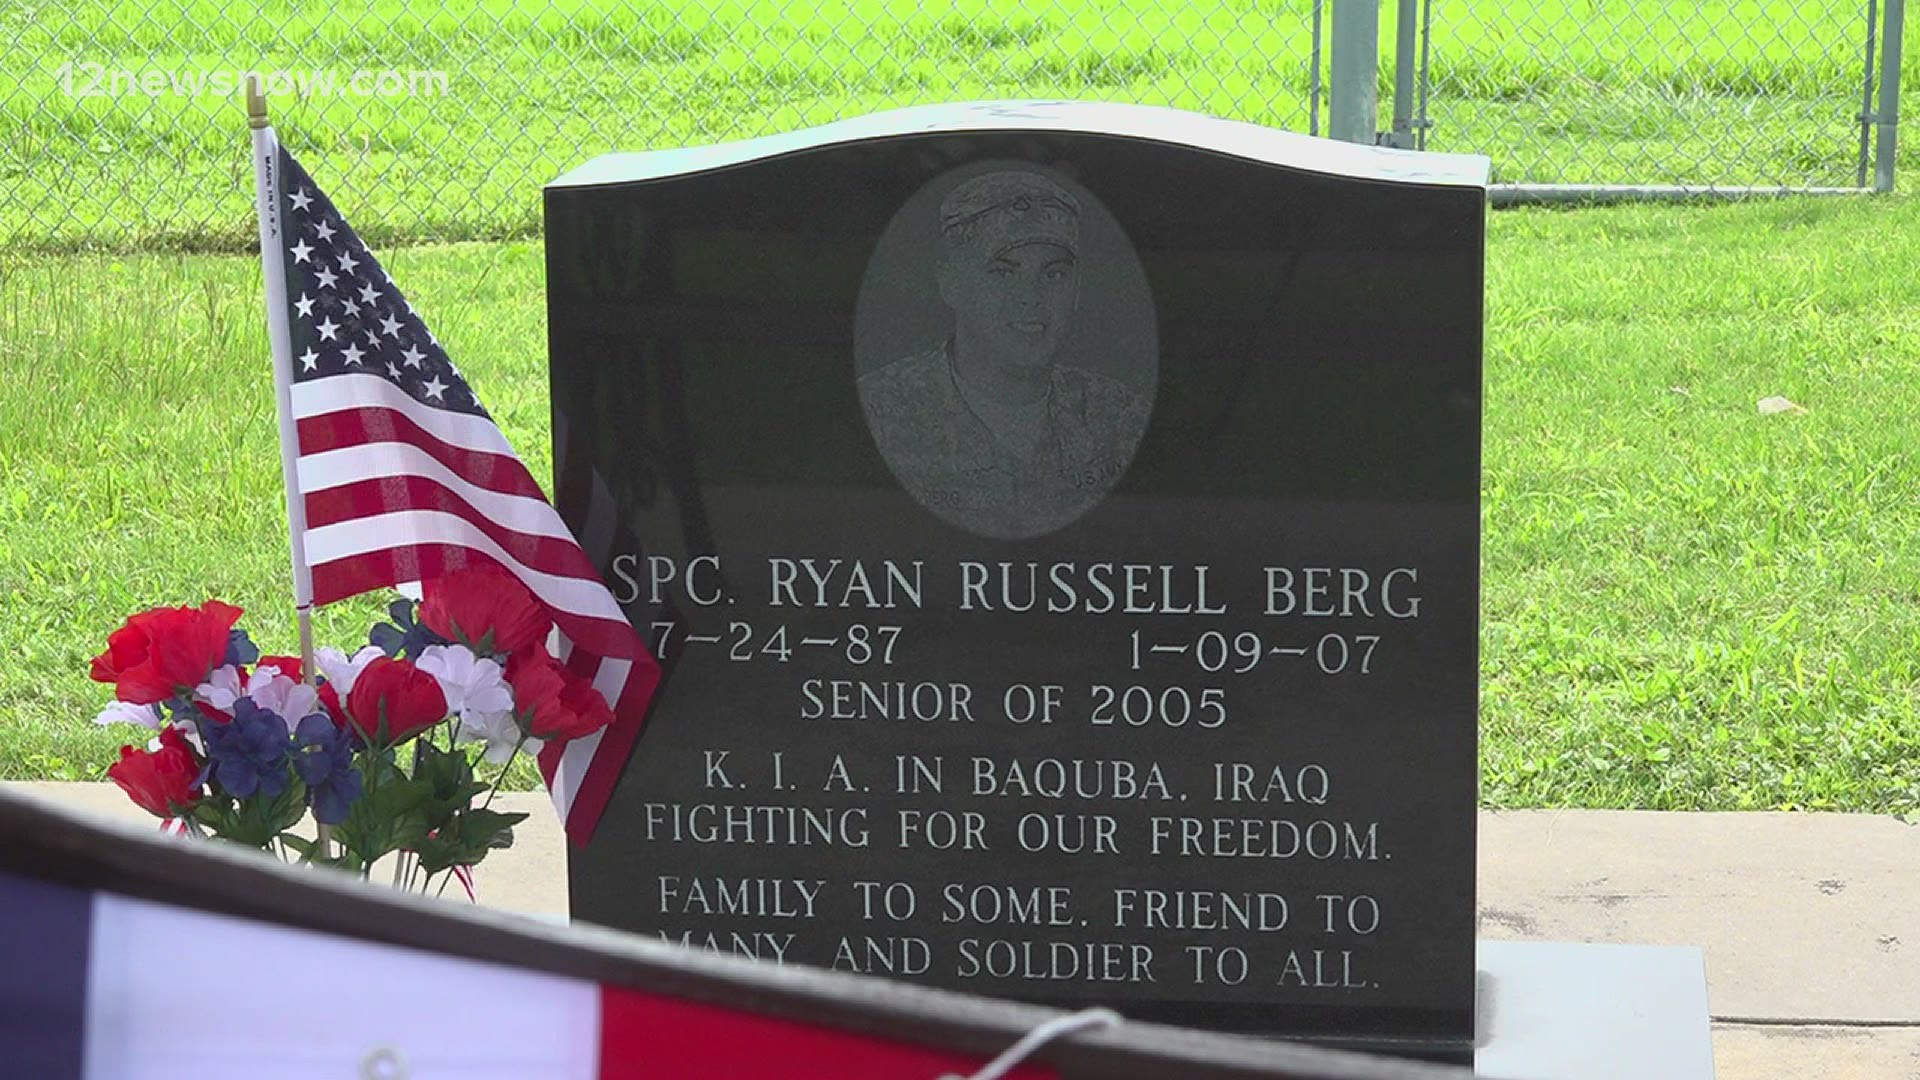 The bench honors former Sabine Pass graduate and Army Specialist Ryan Berg who lost his life while serving in Iraq in 2007.